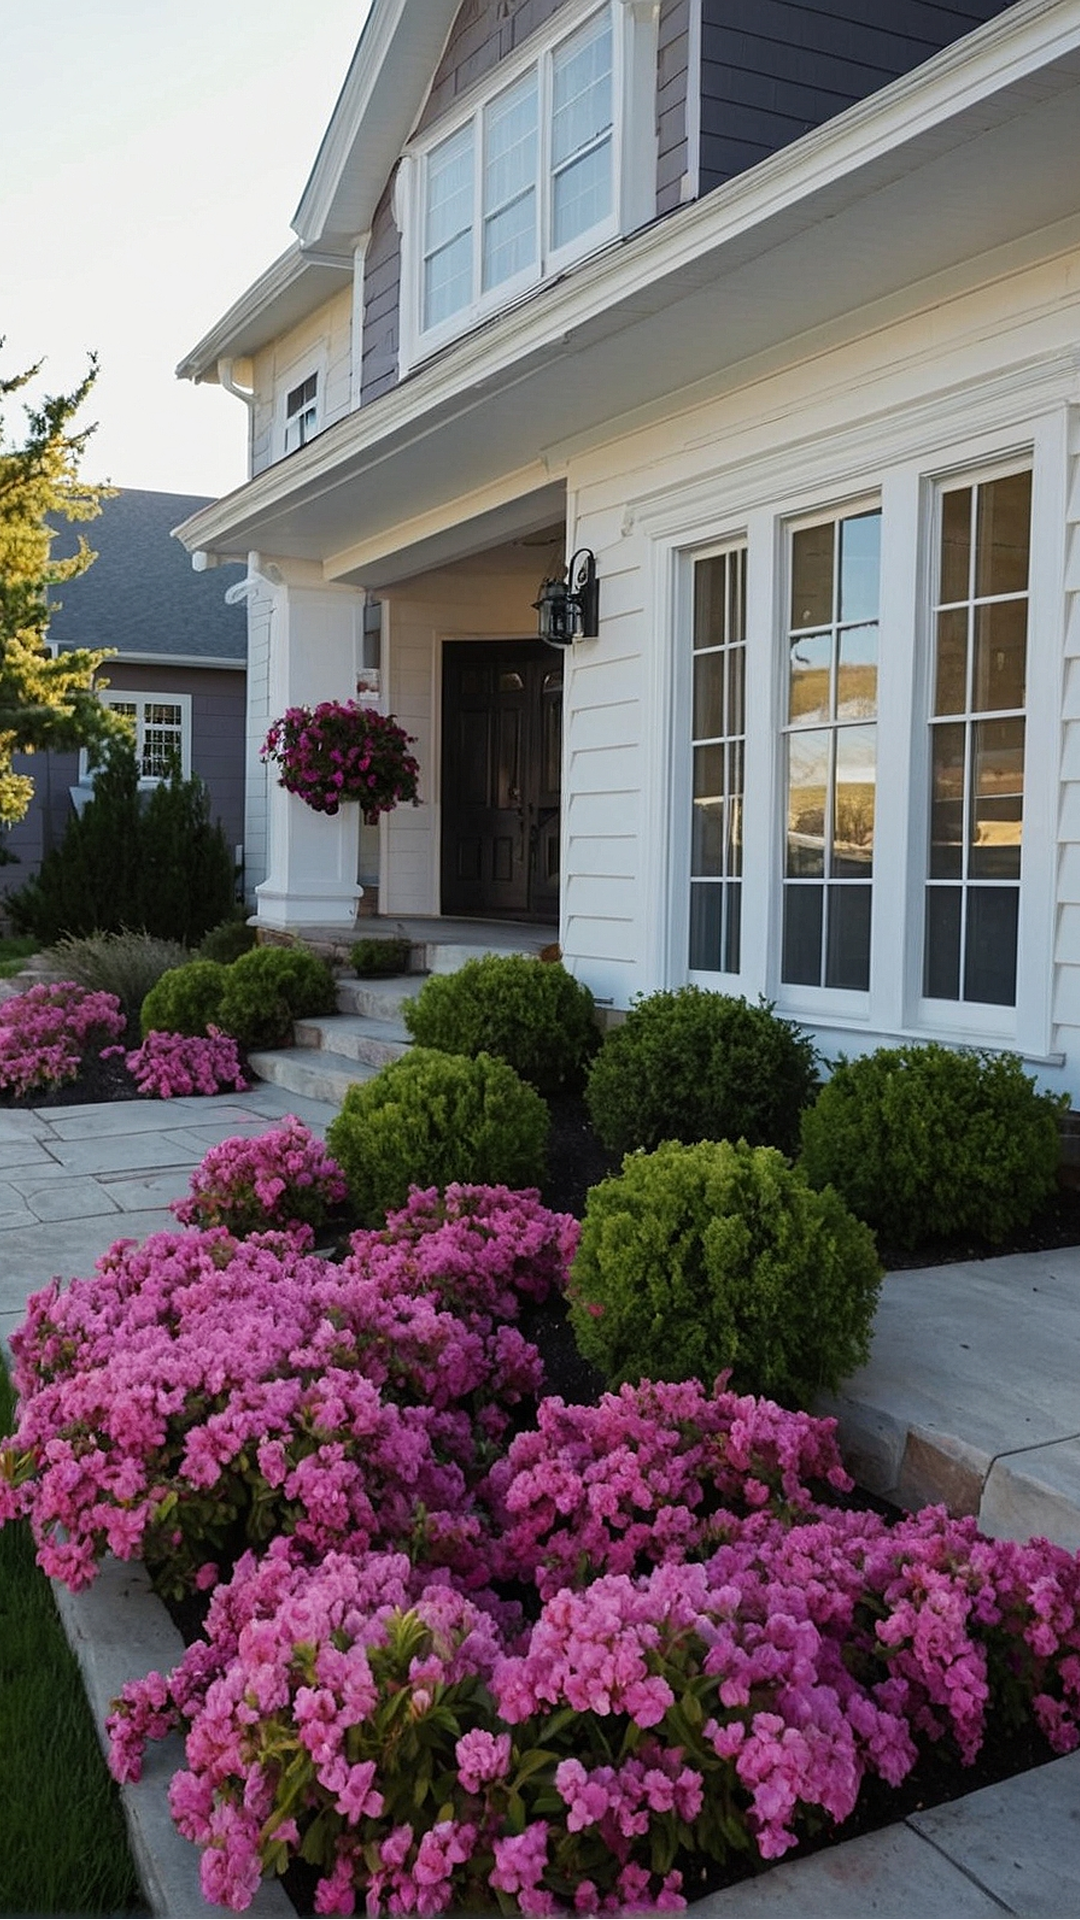 Hydrangea Bushes: Beautiful Burst of Colors in Front Yards